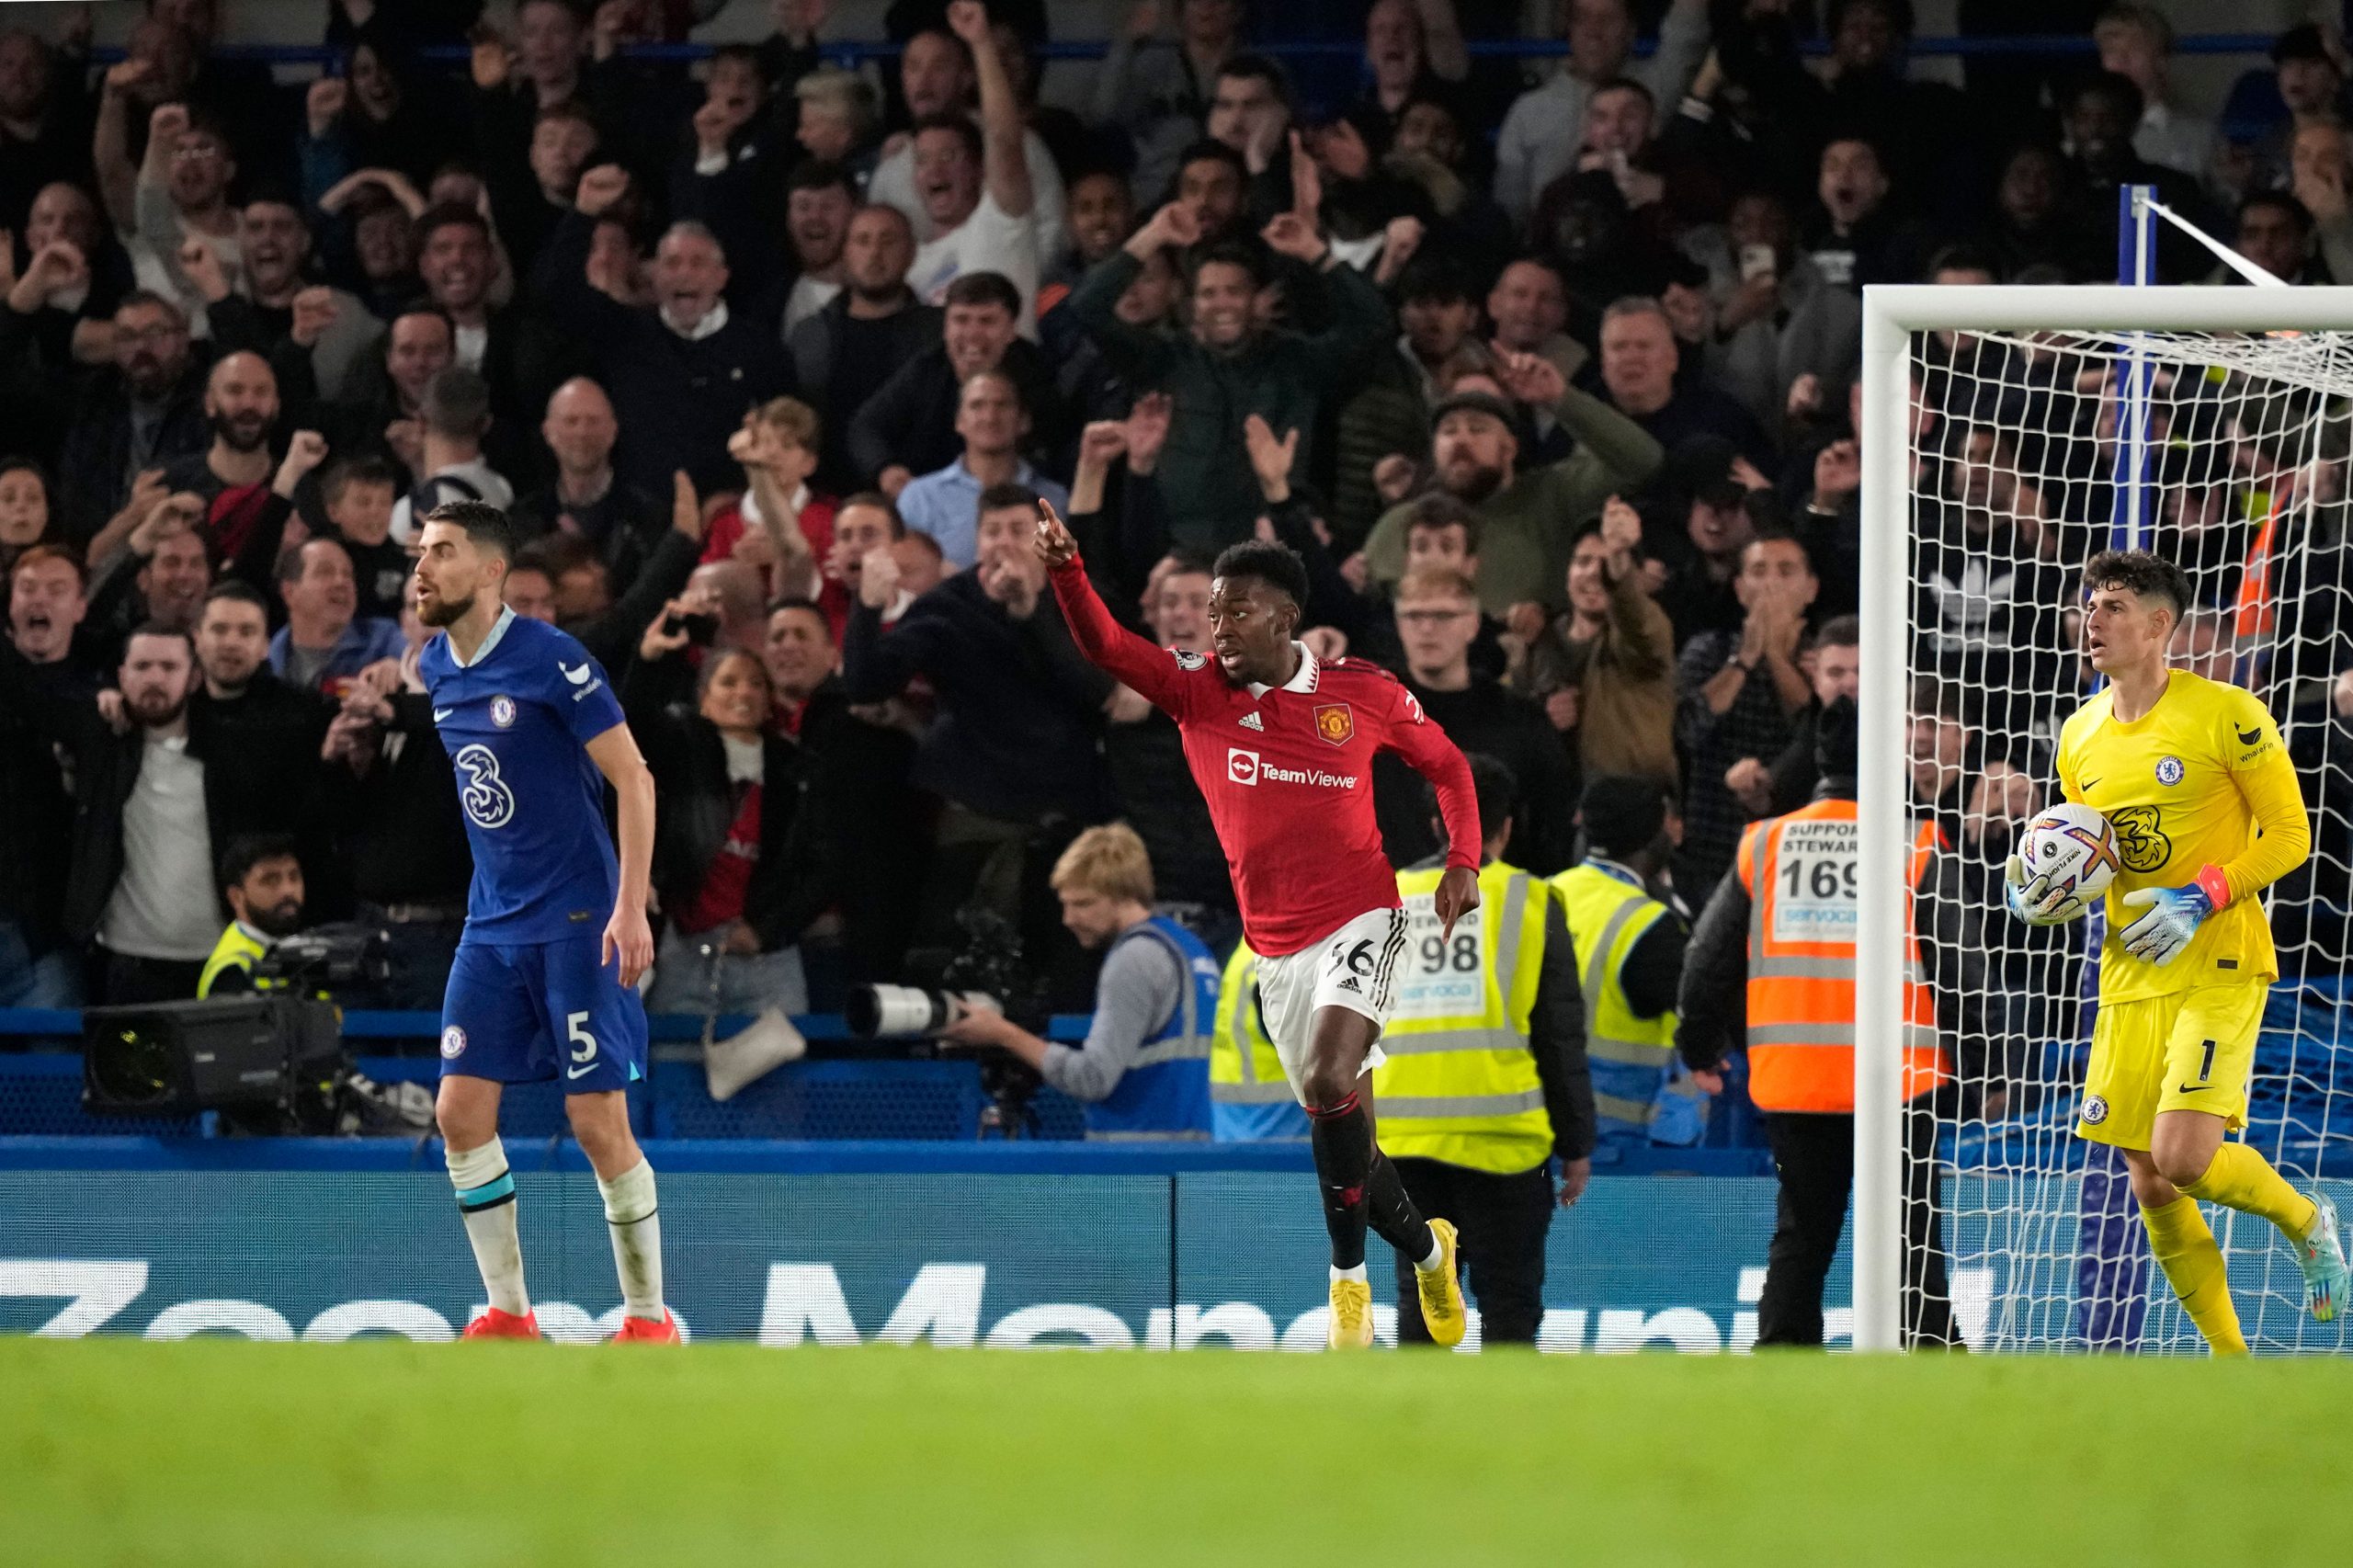 Chelsea vs Manchester United: Watch Casemiro’s extra-time equaliser at Stamford Bridge